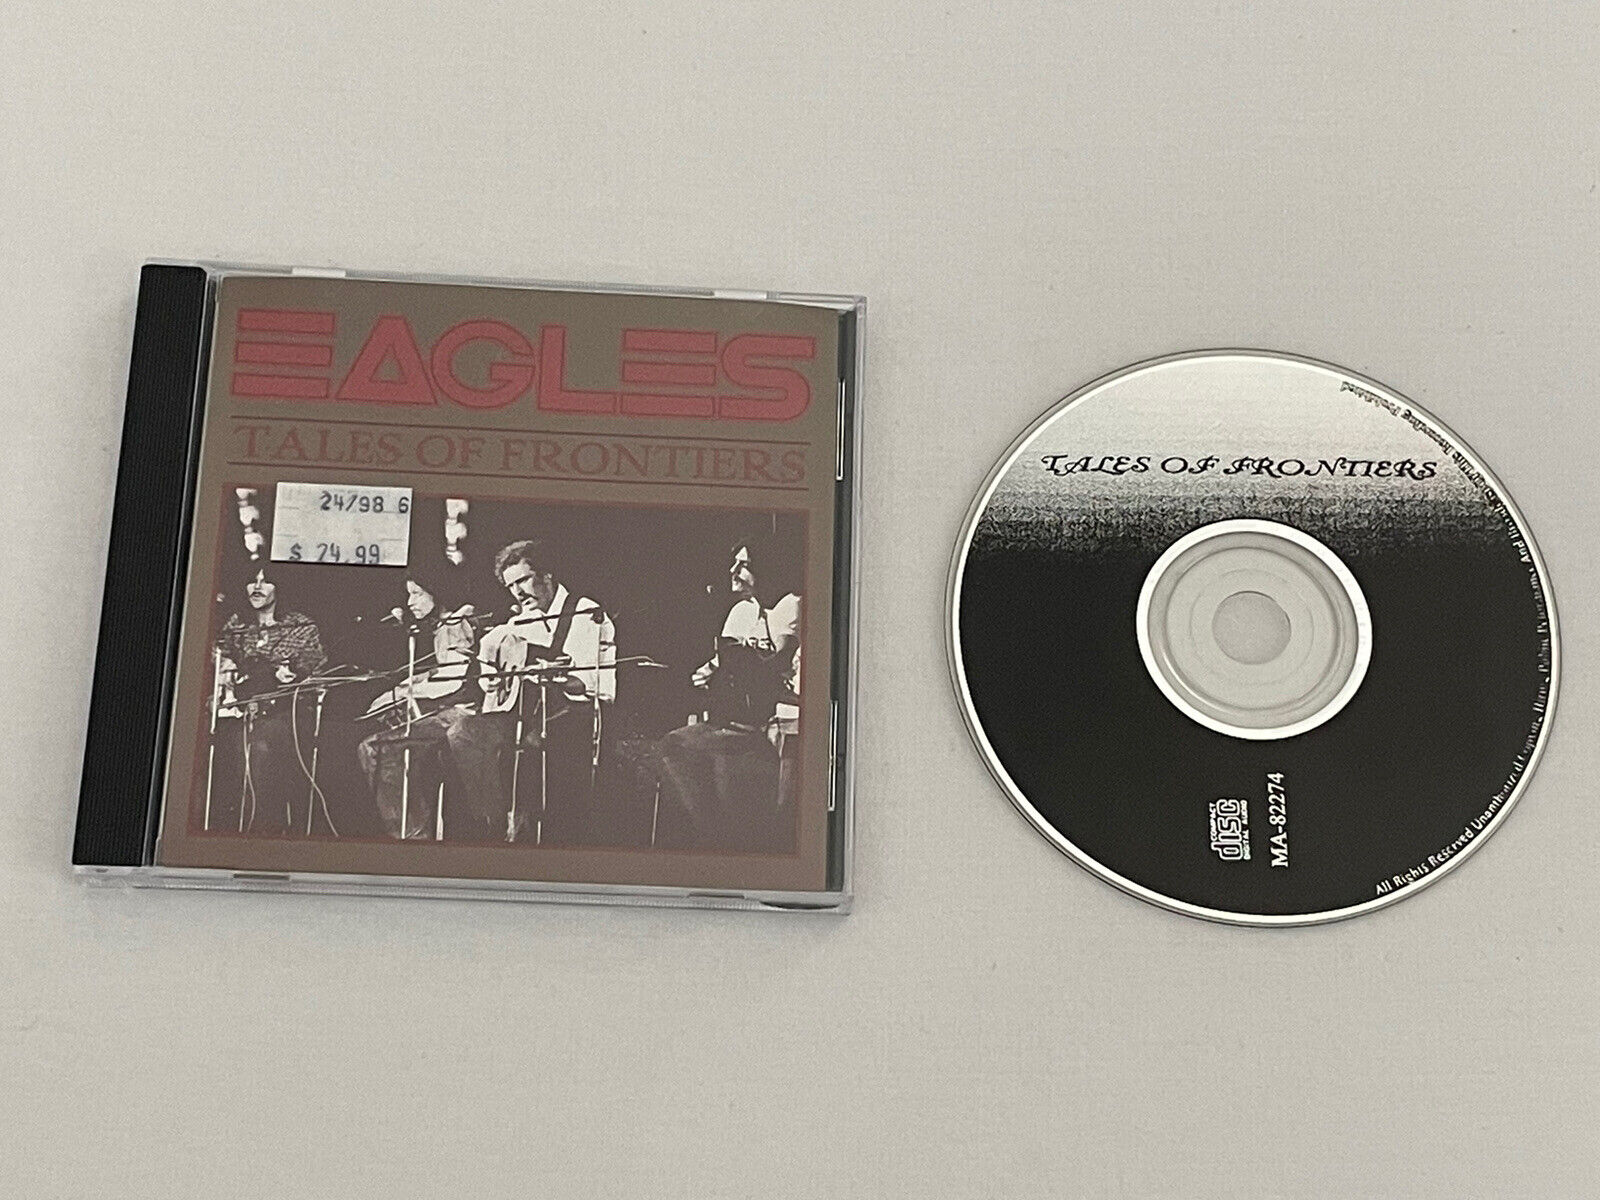 Eagles Tales of Frontiers RARE CD - pre-owned 1123a